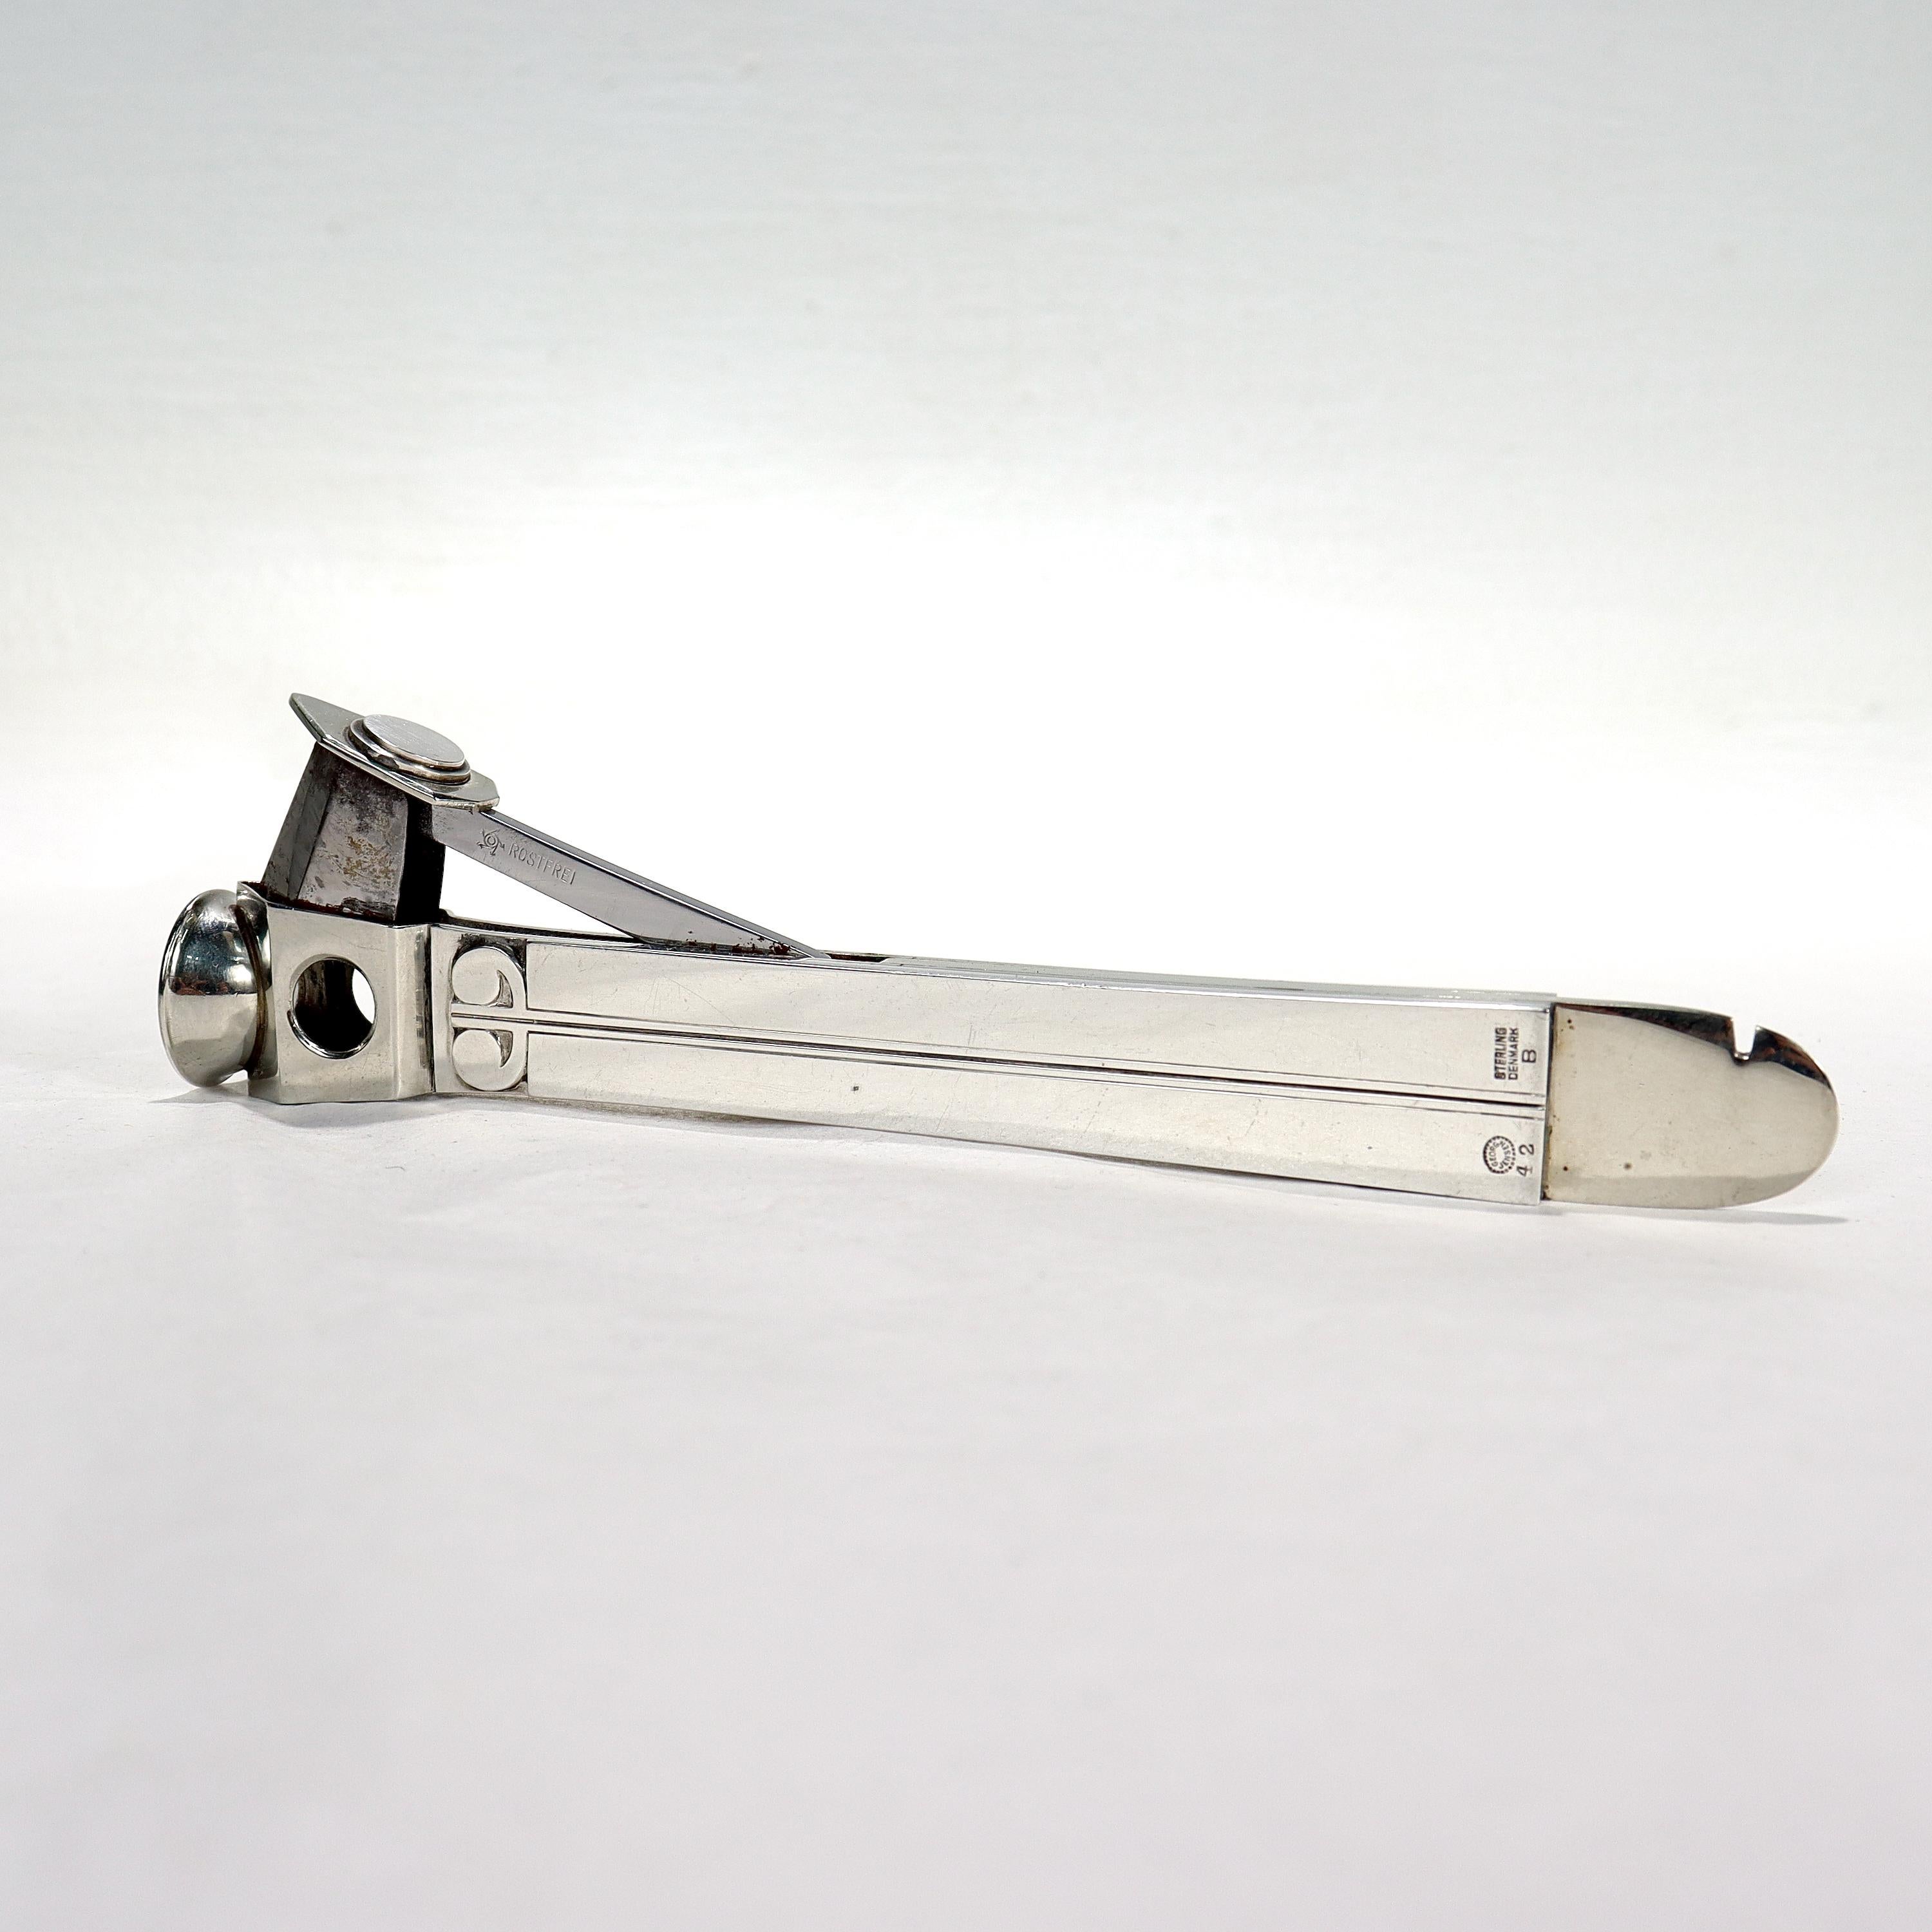 A fine Art Deco sterling silver cigar cutter.

By Georg Jensen.

Model no. 42B

With sterling silver panels mounted on a stainless steel base.

Simply wonderful Art Deco design!

Date:
20th Century

Overall Condition:
It is in overall good,